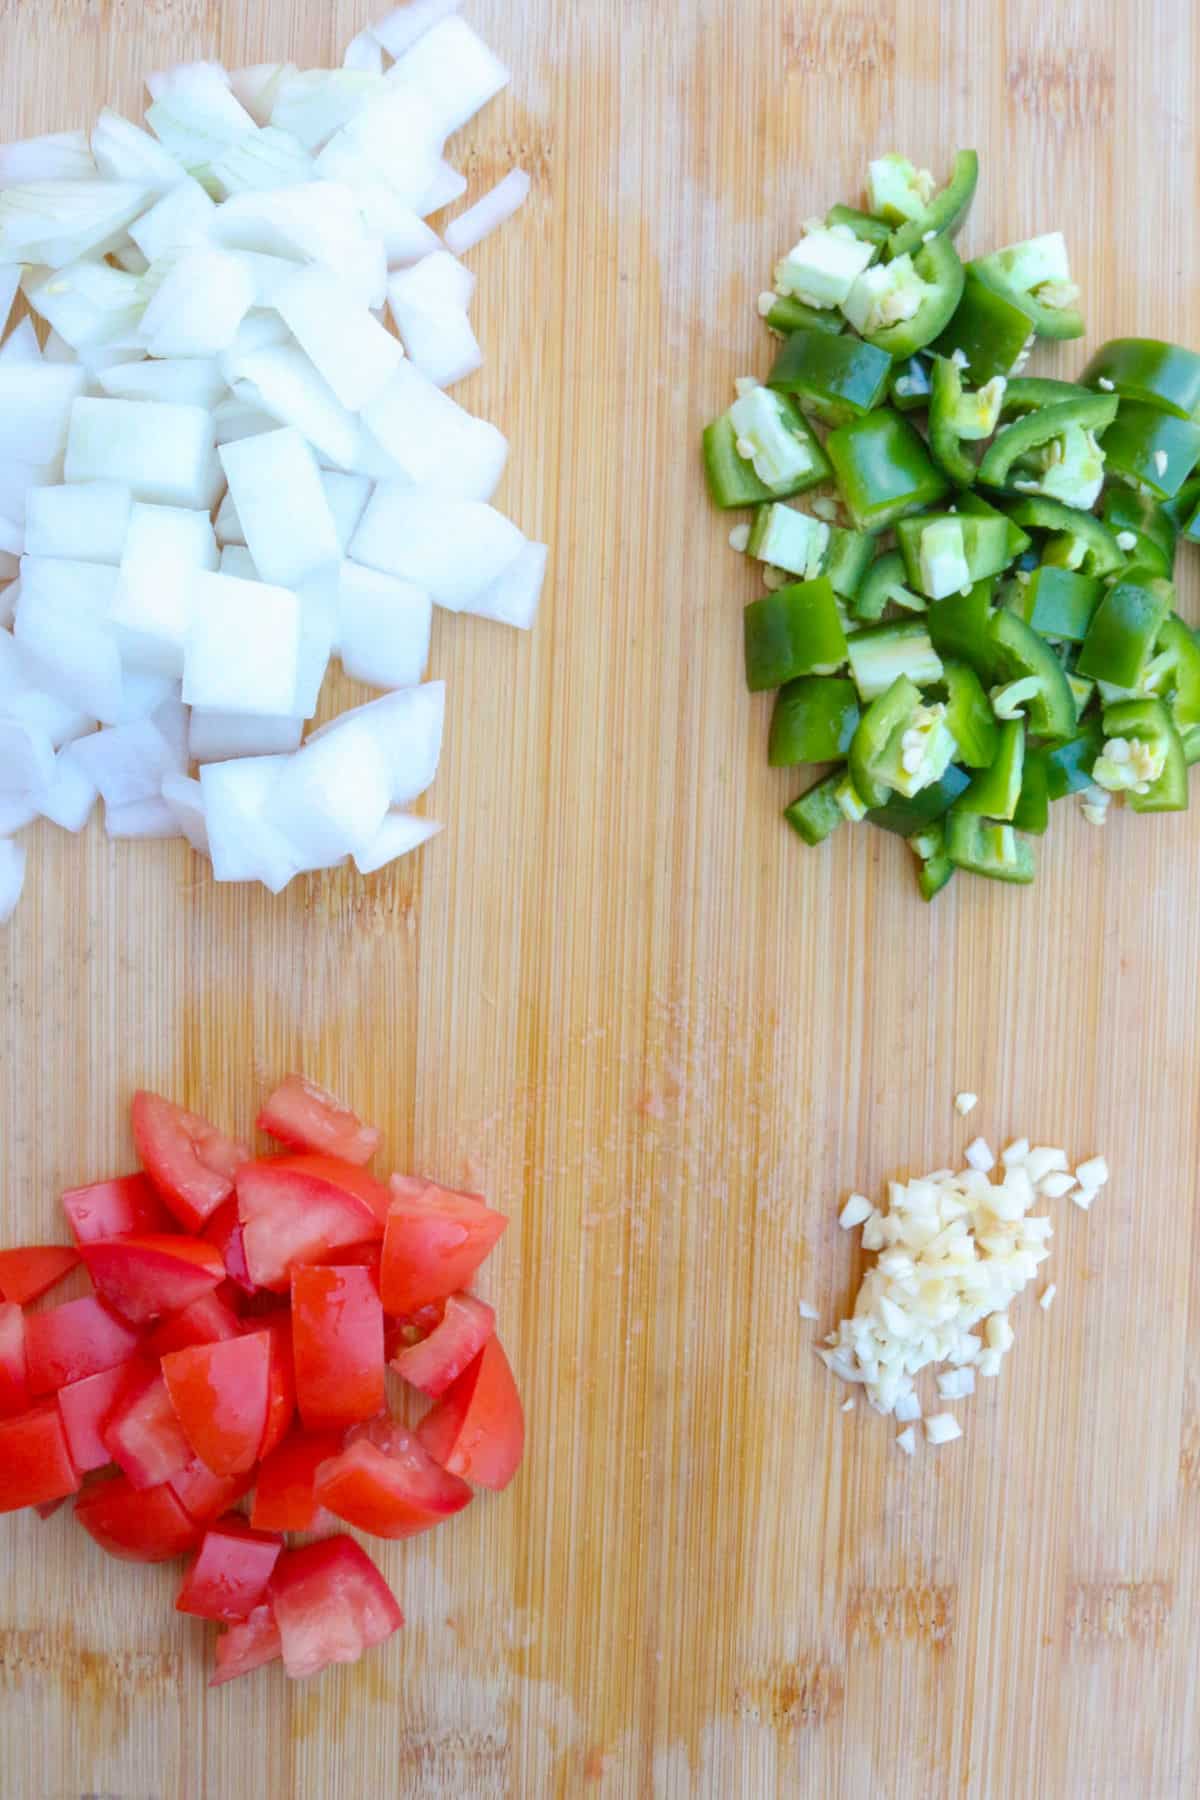 Chopped onions, jalapeños, tomatoes and garlic on a wooden cutting board